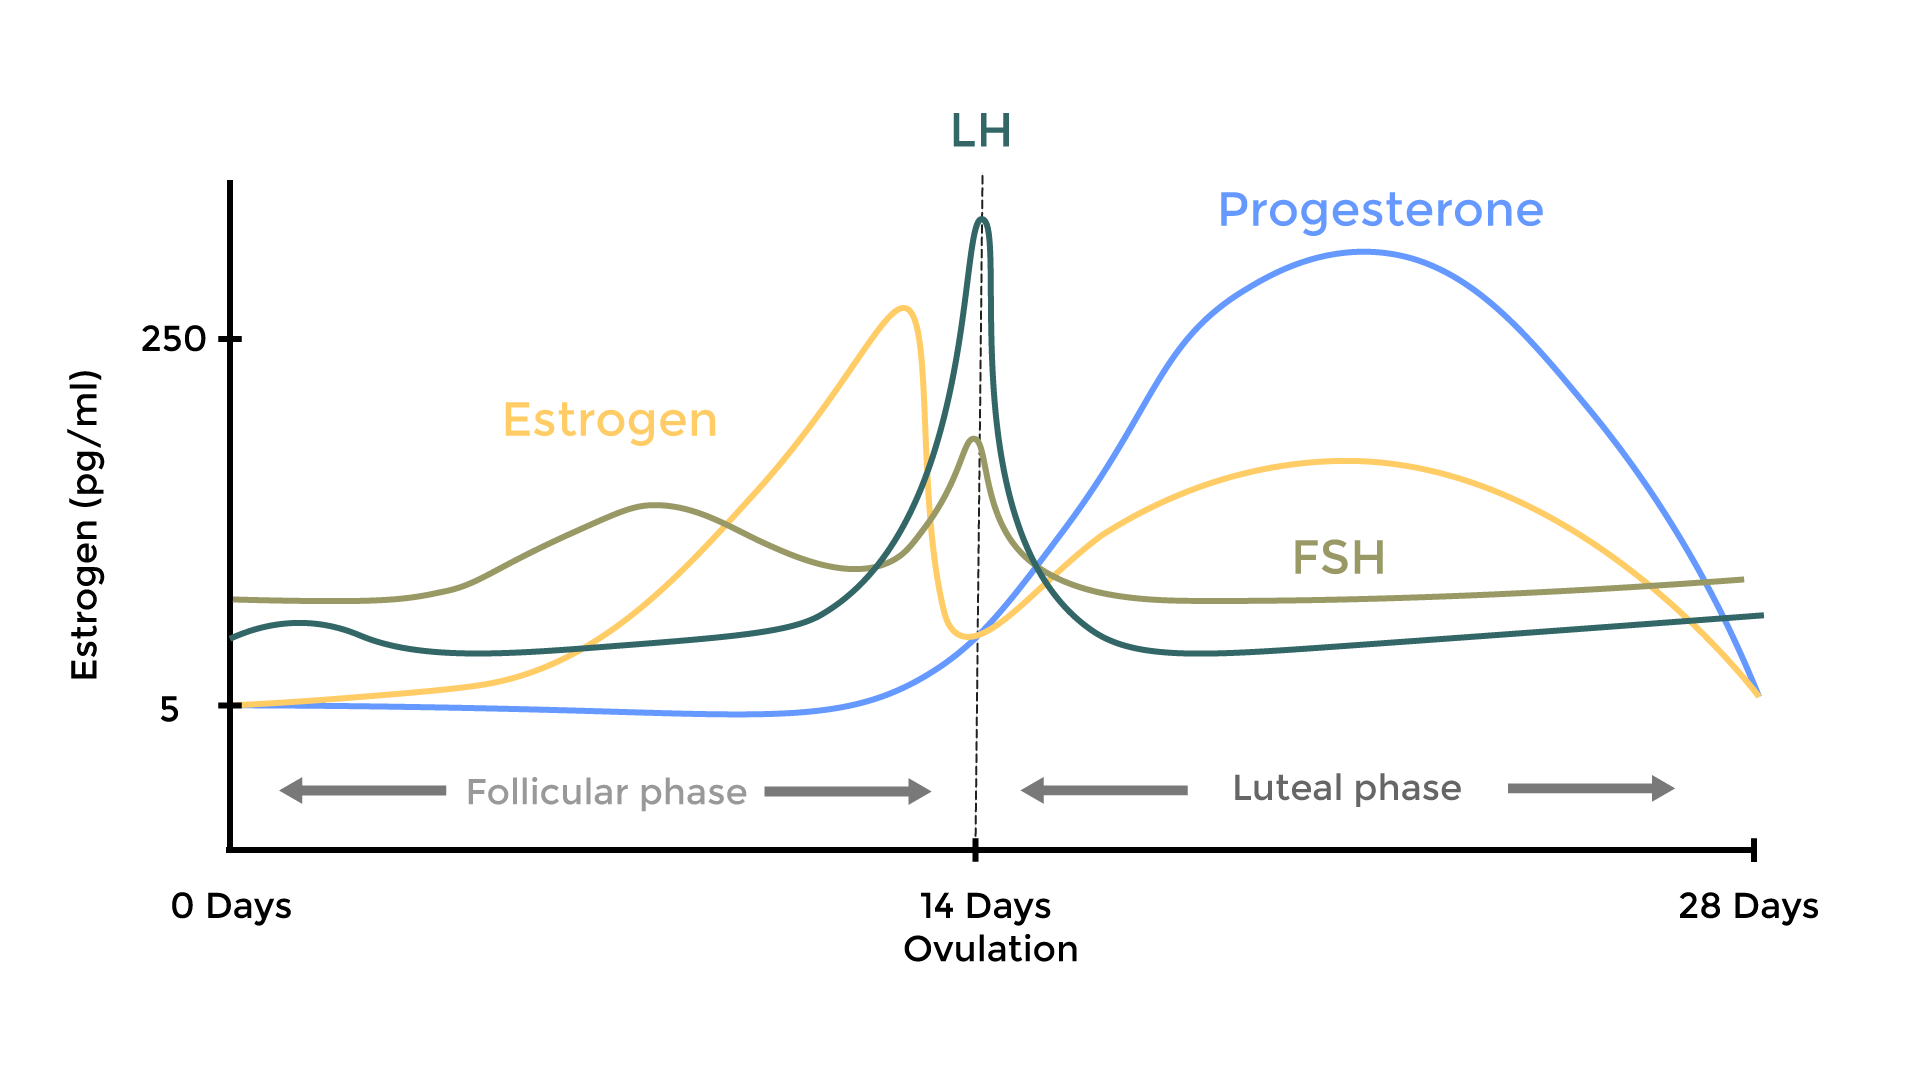 <ul><li><p>The pituitary gland produces <strong>FSH </strong>which stimulates the development of a <strong>follicle</strong> in the ovary. An egg develops inside the follicle and the follicle produces the hormone <strong>oestrogen</strong></p></li><li><p>Oestrogen causes <strong>growth and repair of the lining of the uterus wall</strong> and inhibits production of <strong>FSH. </strong>When oestrogen rises to a high enough level it stimulates the release of <strong>LH</strong> from the pituitary gland which causes <strong>ovulation</strong> (usually around day 14 of the cycle)</p></li><li><p>The follicle becomes the <strong>corpus luteum</strong> and starts producing <strong>progesterone. </strong>Progesterone <strong>maintains the uterus lining</strong> (the thickness of the uterus wall). If the ovum is not fertilised, the corpus luteum breaks down and progesterone levels drop. This causes <strong>menstruation</strong>, where the uterus lining breaks down and is removed through the vagina - commonly known as having a period</p></li><li><p>If pregnancy does occur the corpus luteum <strong>continues to produce progesterone</strong>, preventing the uterus lining from breaking down and<strong> aborting</strong> the pregnancy</p></li><li><p>It does this until the <strong>placenta</strong> has developed, at which point it starts secreting progesterone and <strong>continues to do so throughout the pregnancy</strong></p></li></ul>